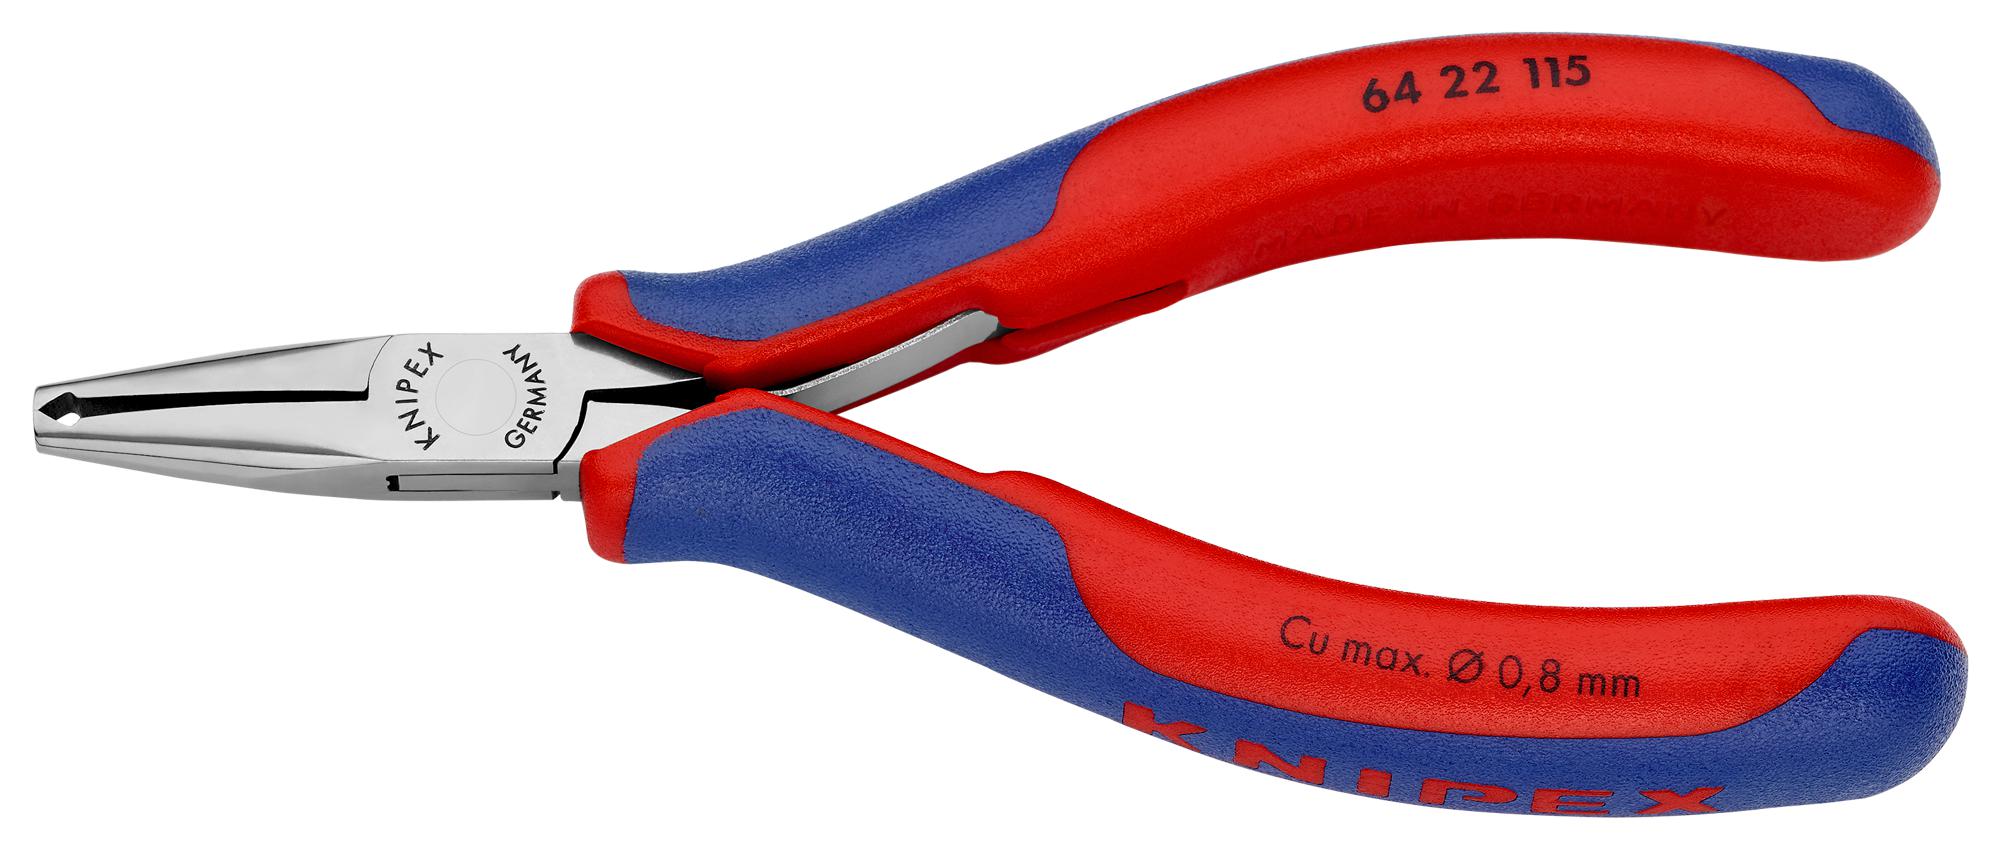 64 22 115 CUTTERS, OBLIQUE 115MM KNIPEX